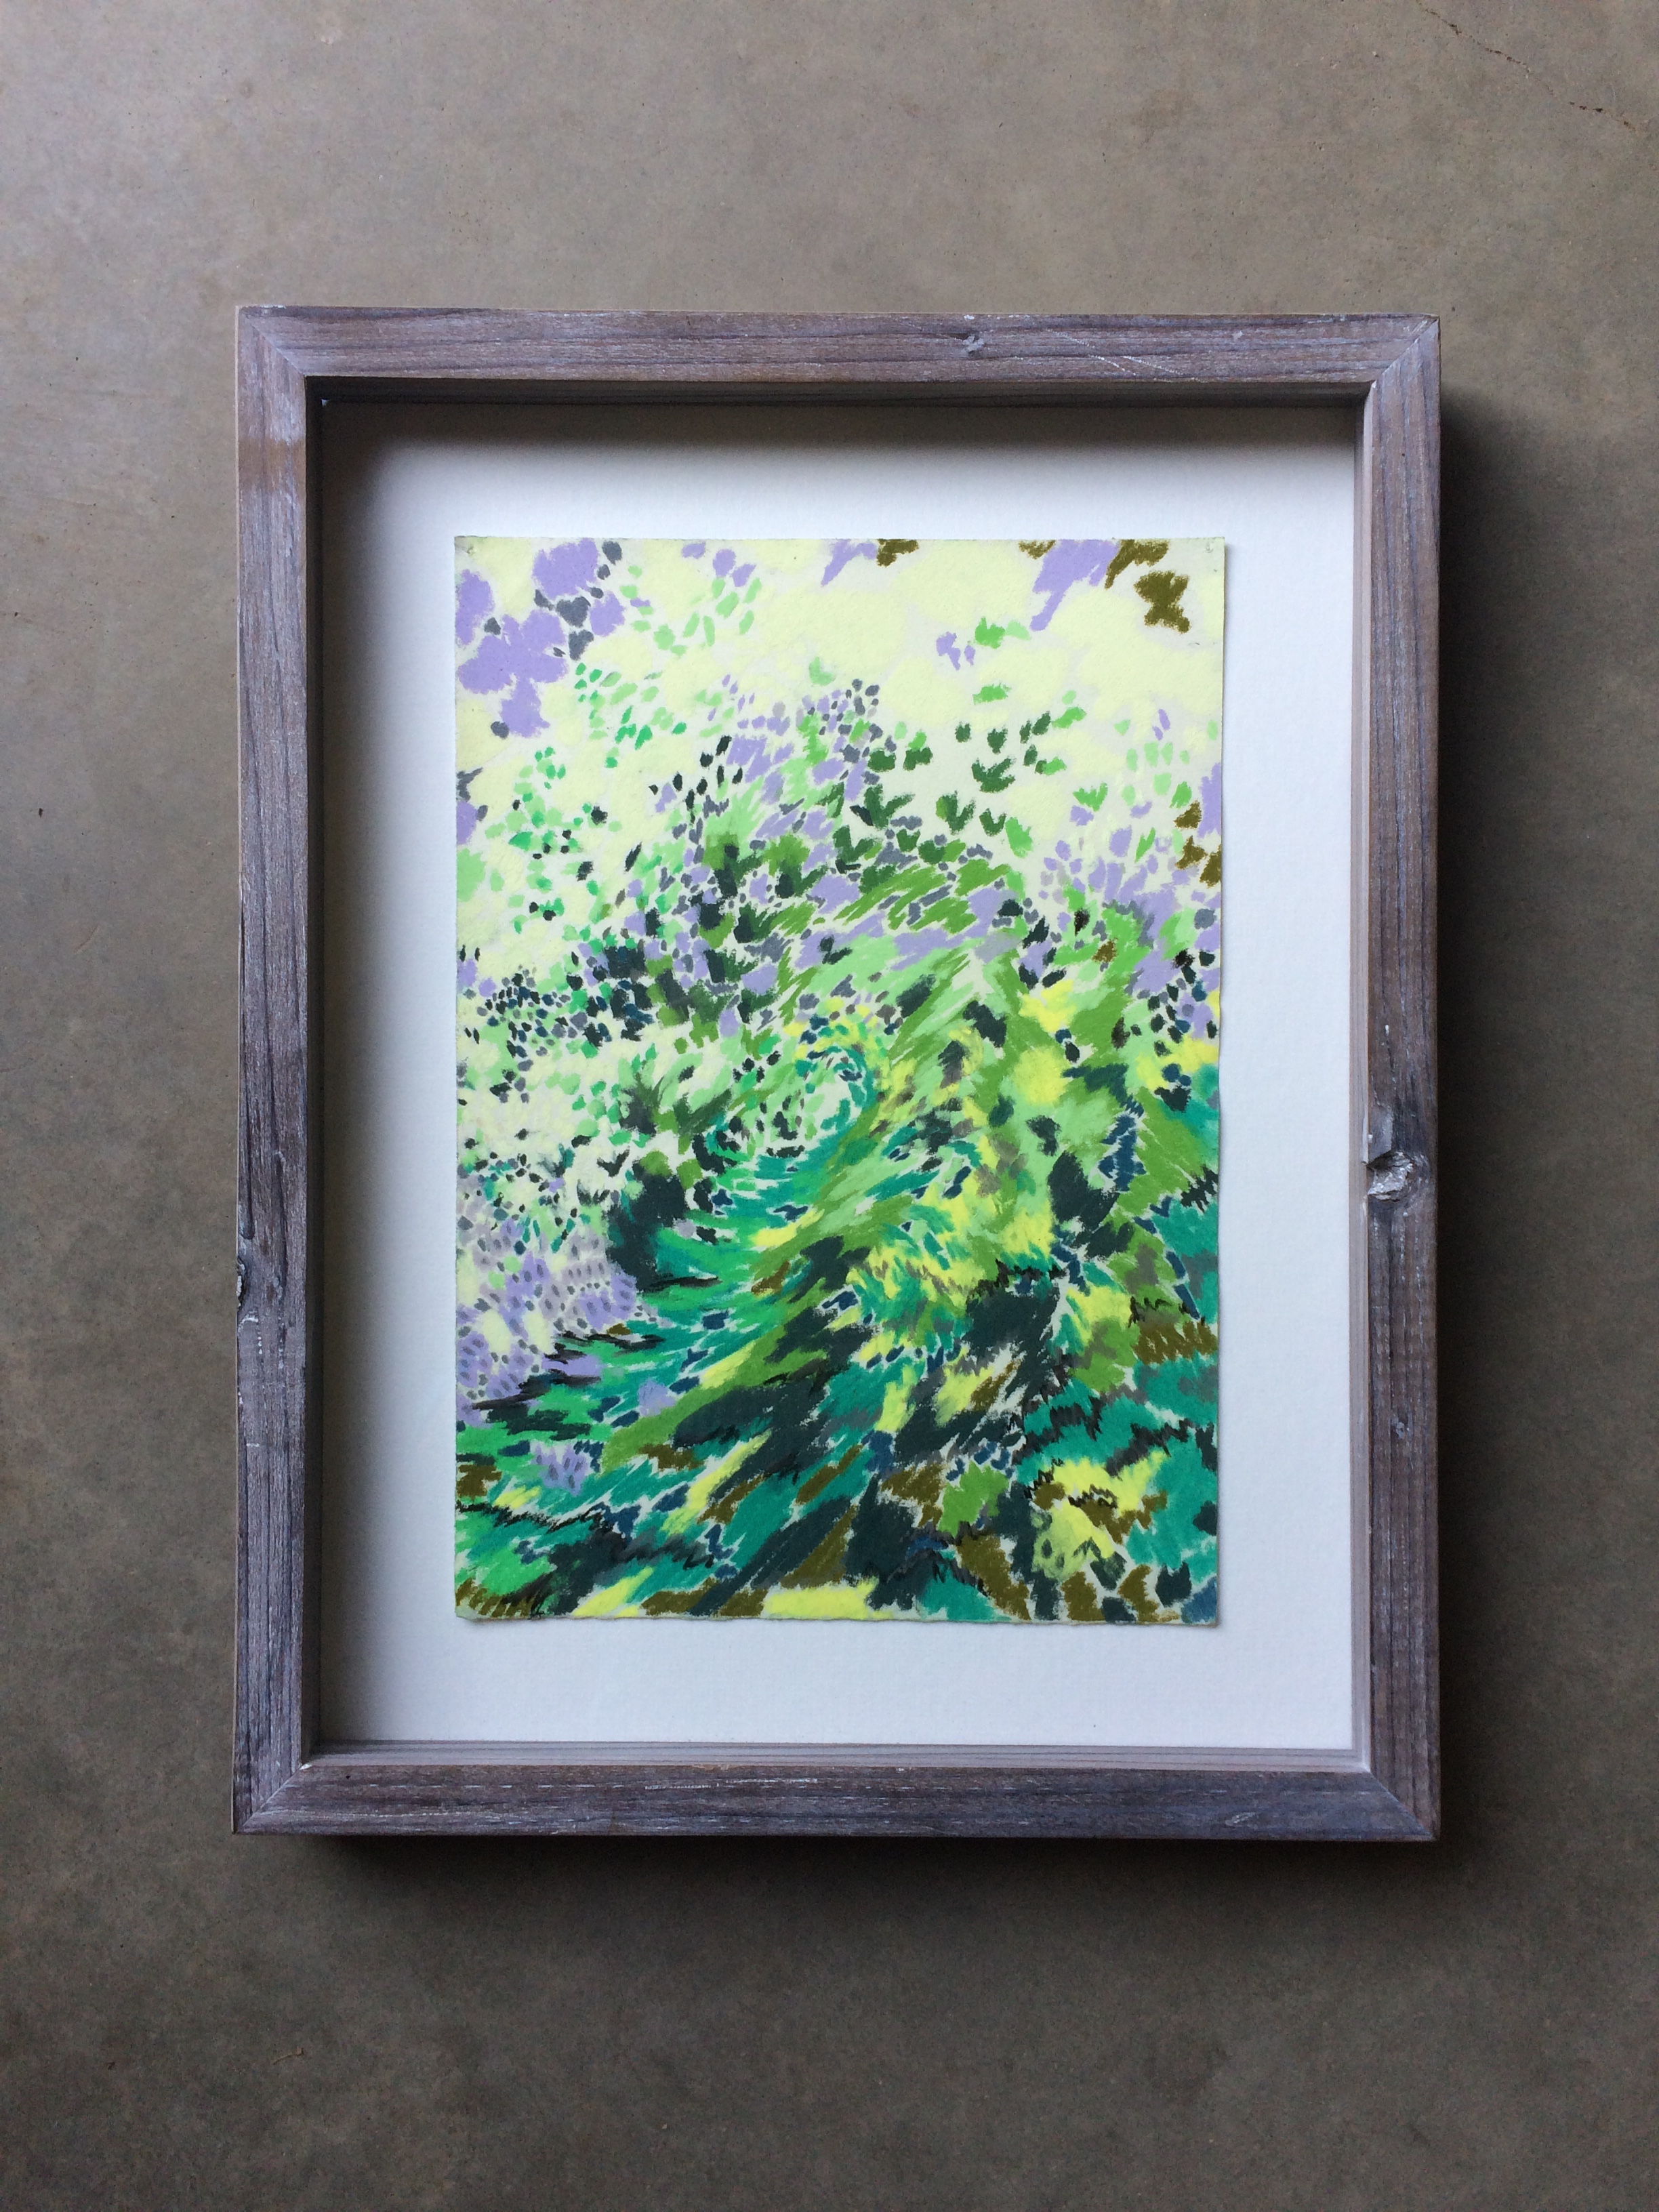  chalk on paper  ( 7.5 x 11 inches unframed)  hand built lime-washed redwood frame  SOLD 